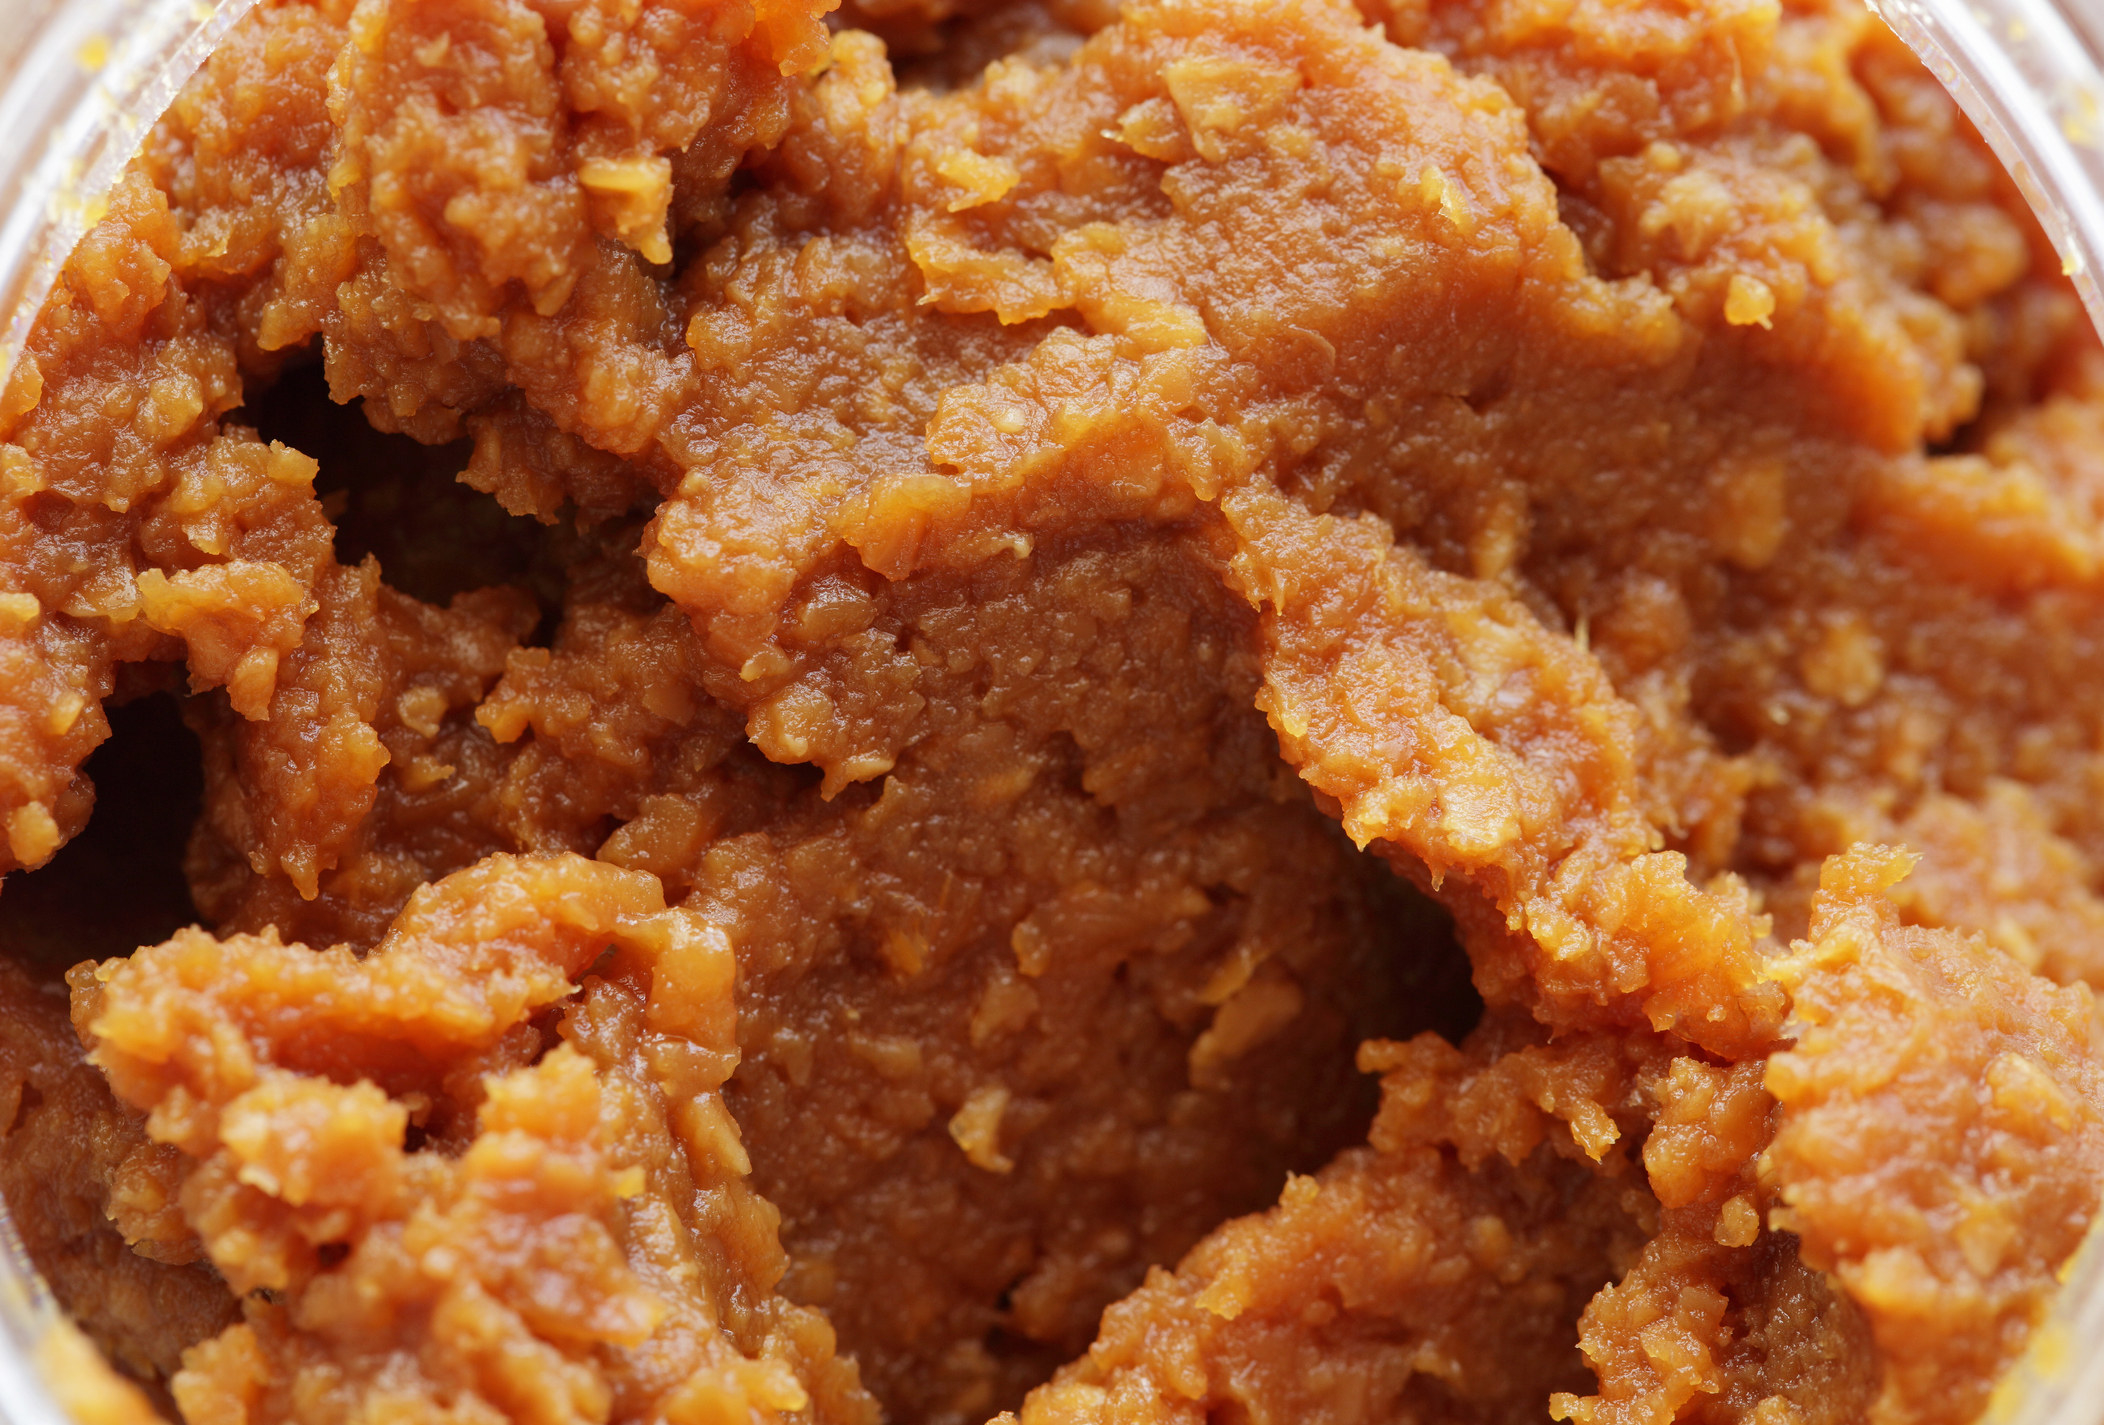 A close-up of miso paste.